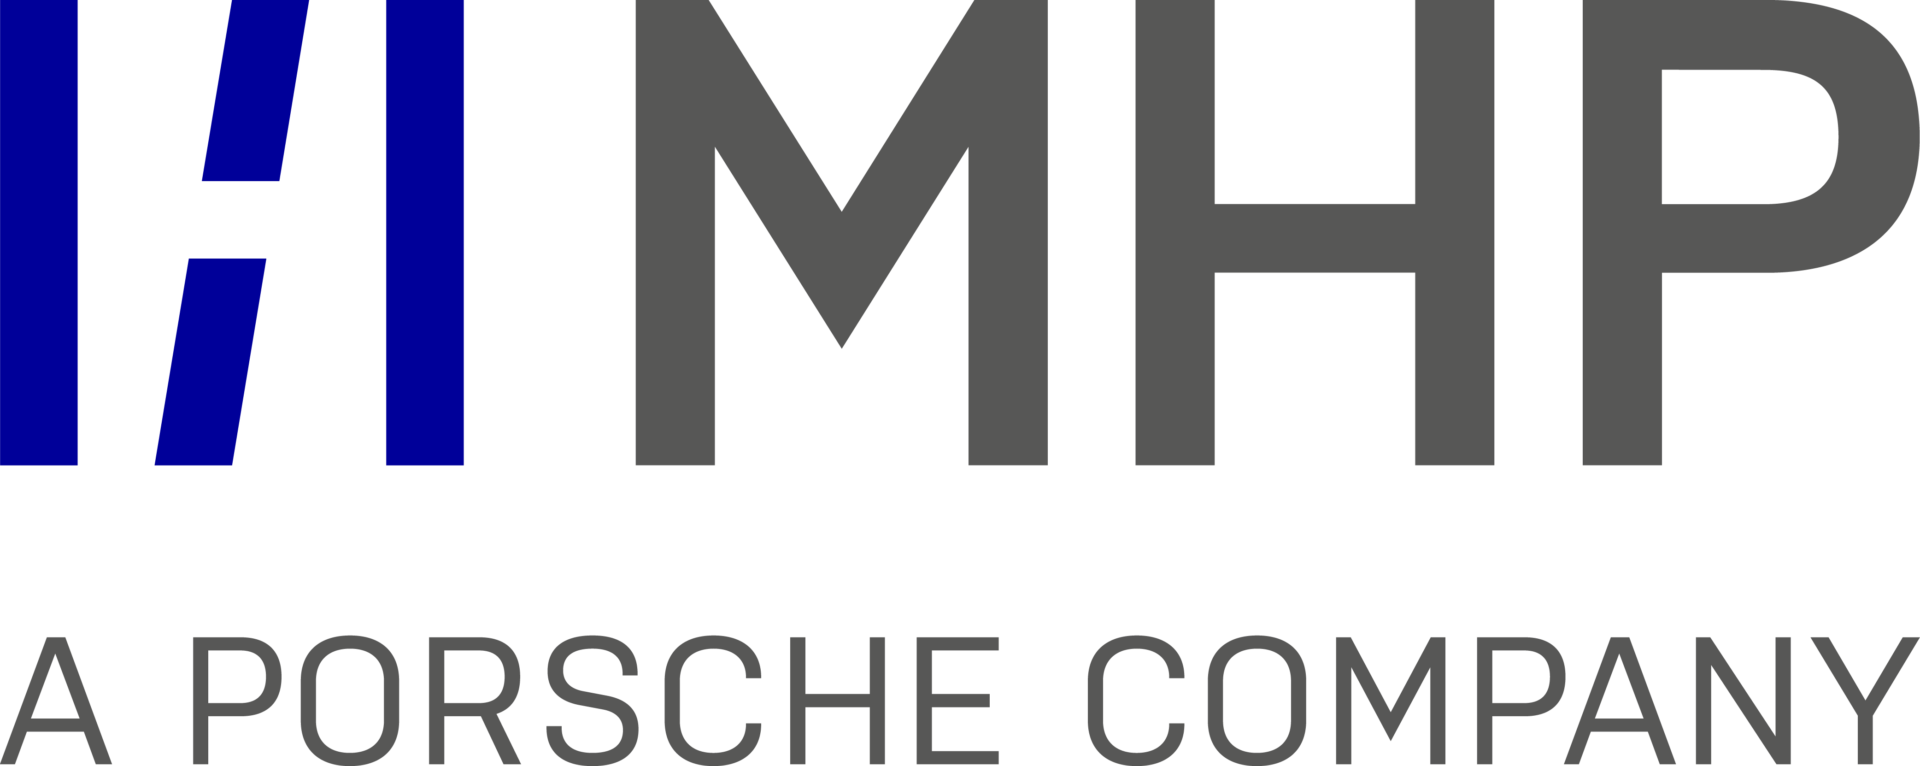 The image displays the MHP logo, which consists of the letters "MHP" in bold, dark gray text. To the left of "MHP," there are two vertical bars, one blue and one gray. Below "MHP," the text reads "A Porsche Company" in smaller, dark gray font.